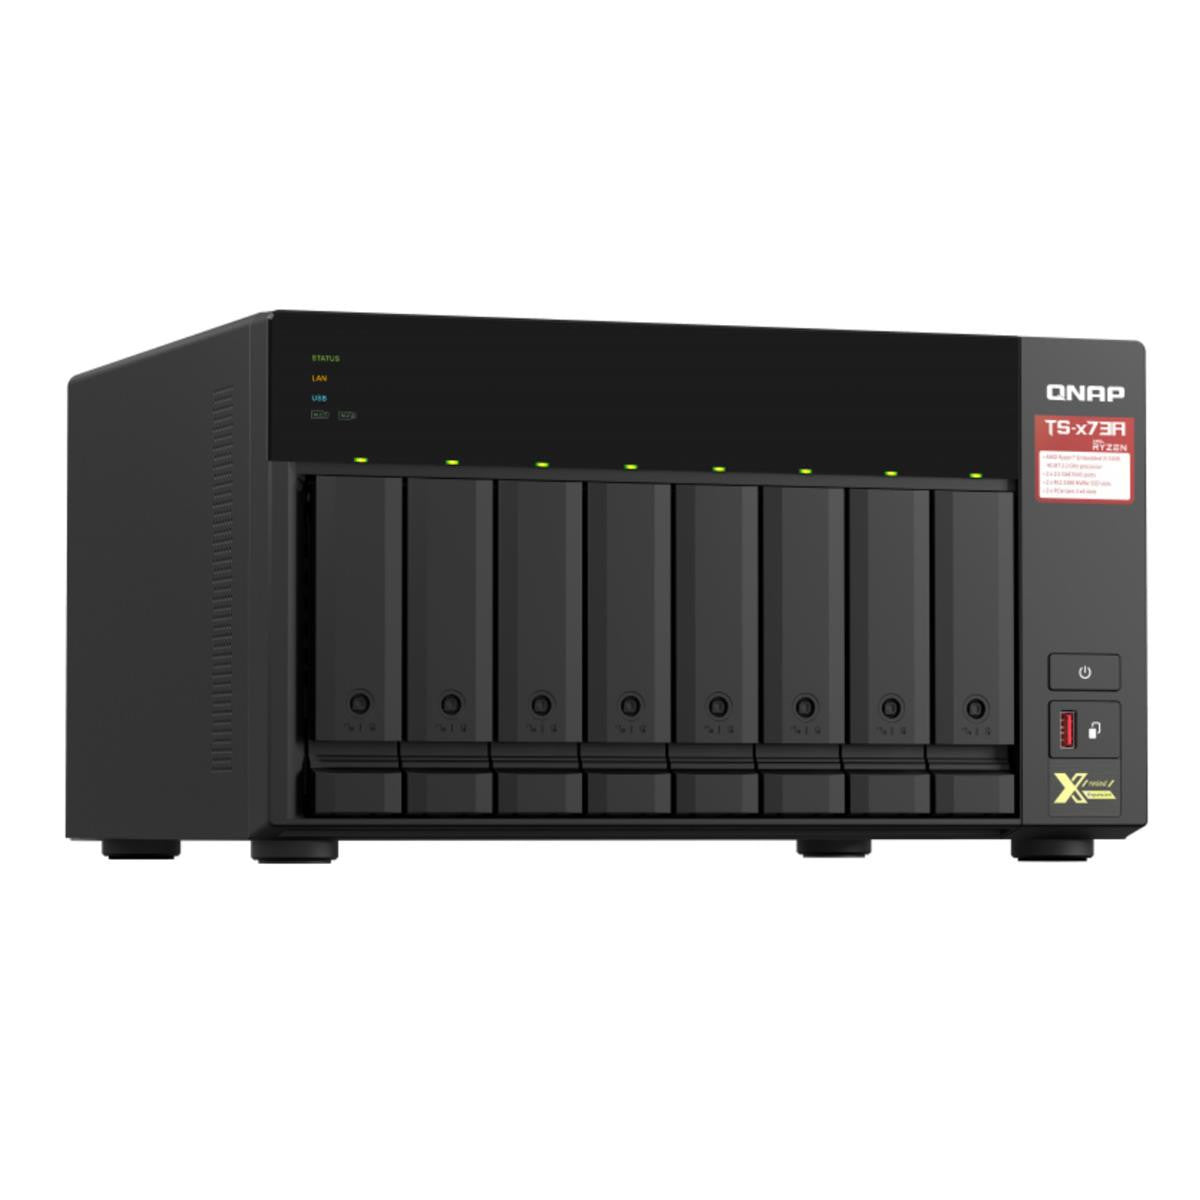 QNAP TS-873A 8-BAY NAS with 32GB DDR4 RAM and 80TB (8x10TB) Western Digital RED PLUS Drives Fully Assembled and Tested